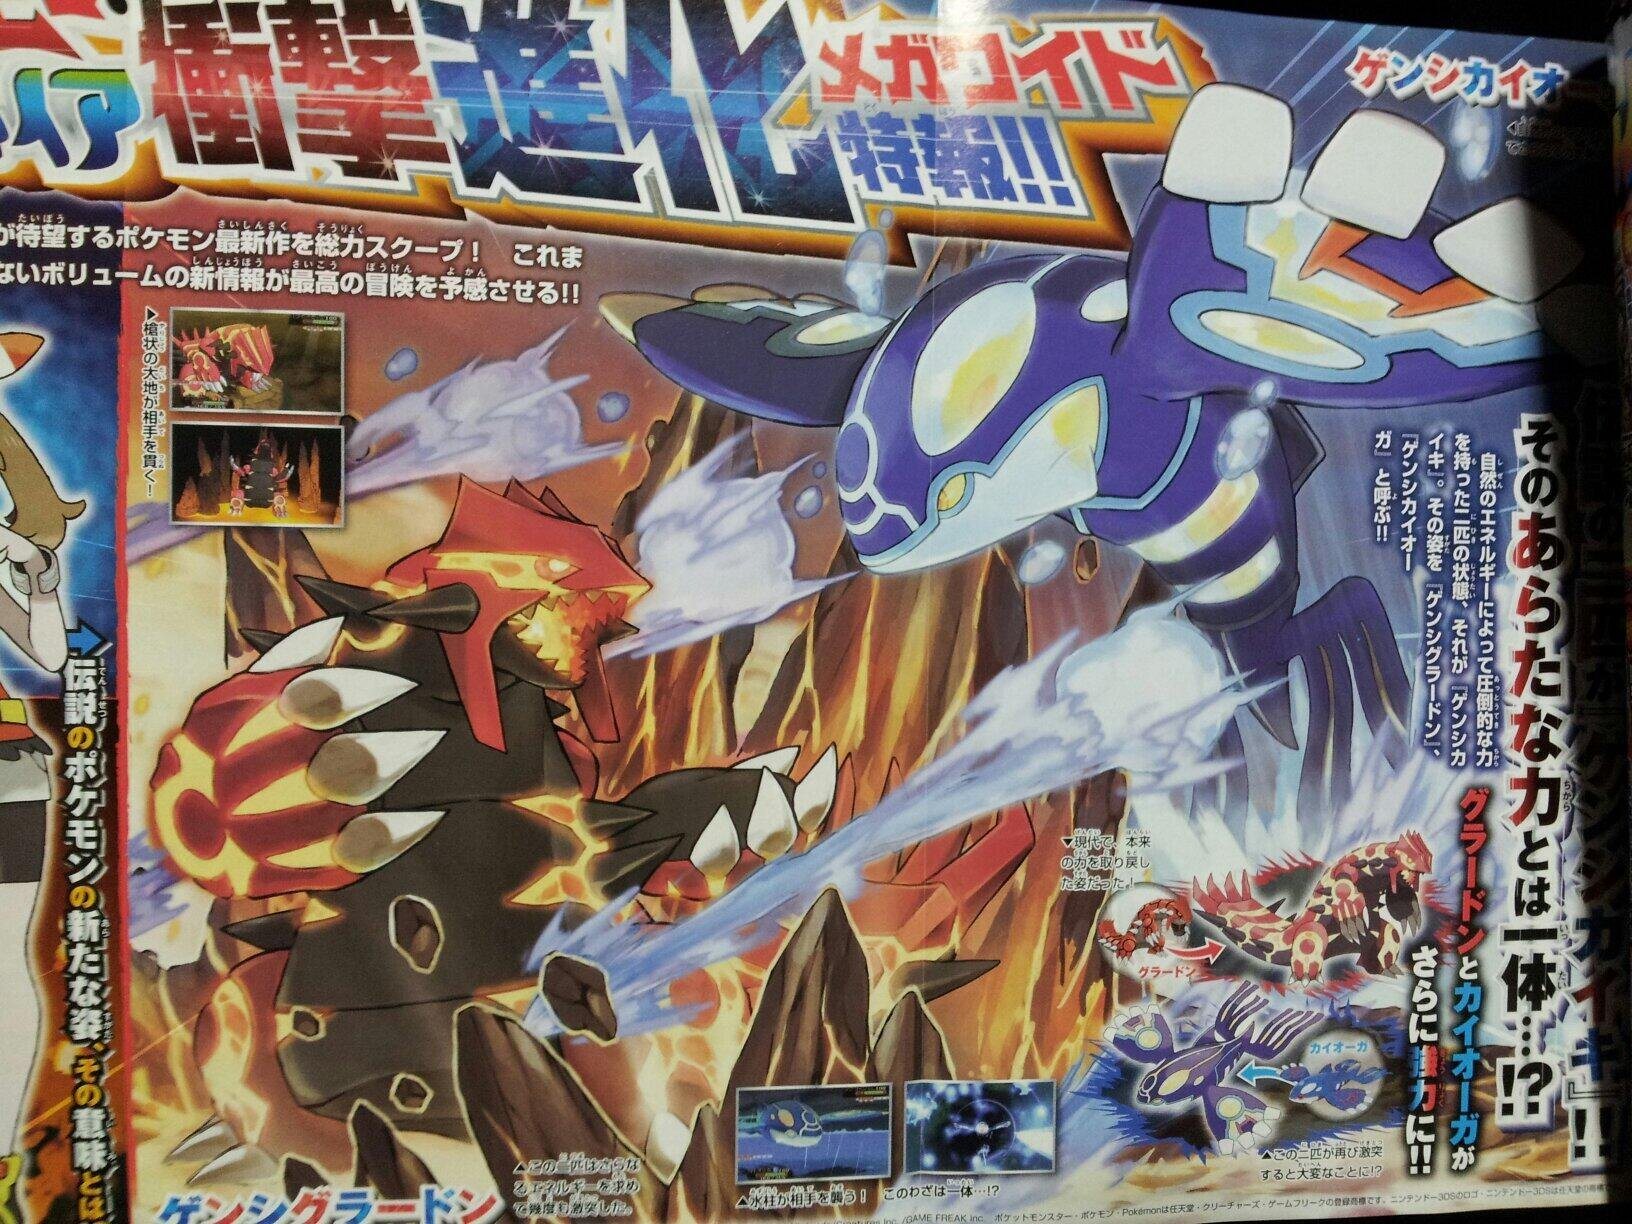 Omega Ruby and Alpha Sapphire in CoroCoro - Kyogre and Groudon